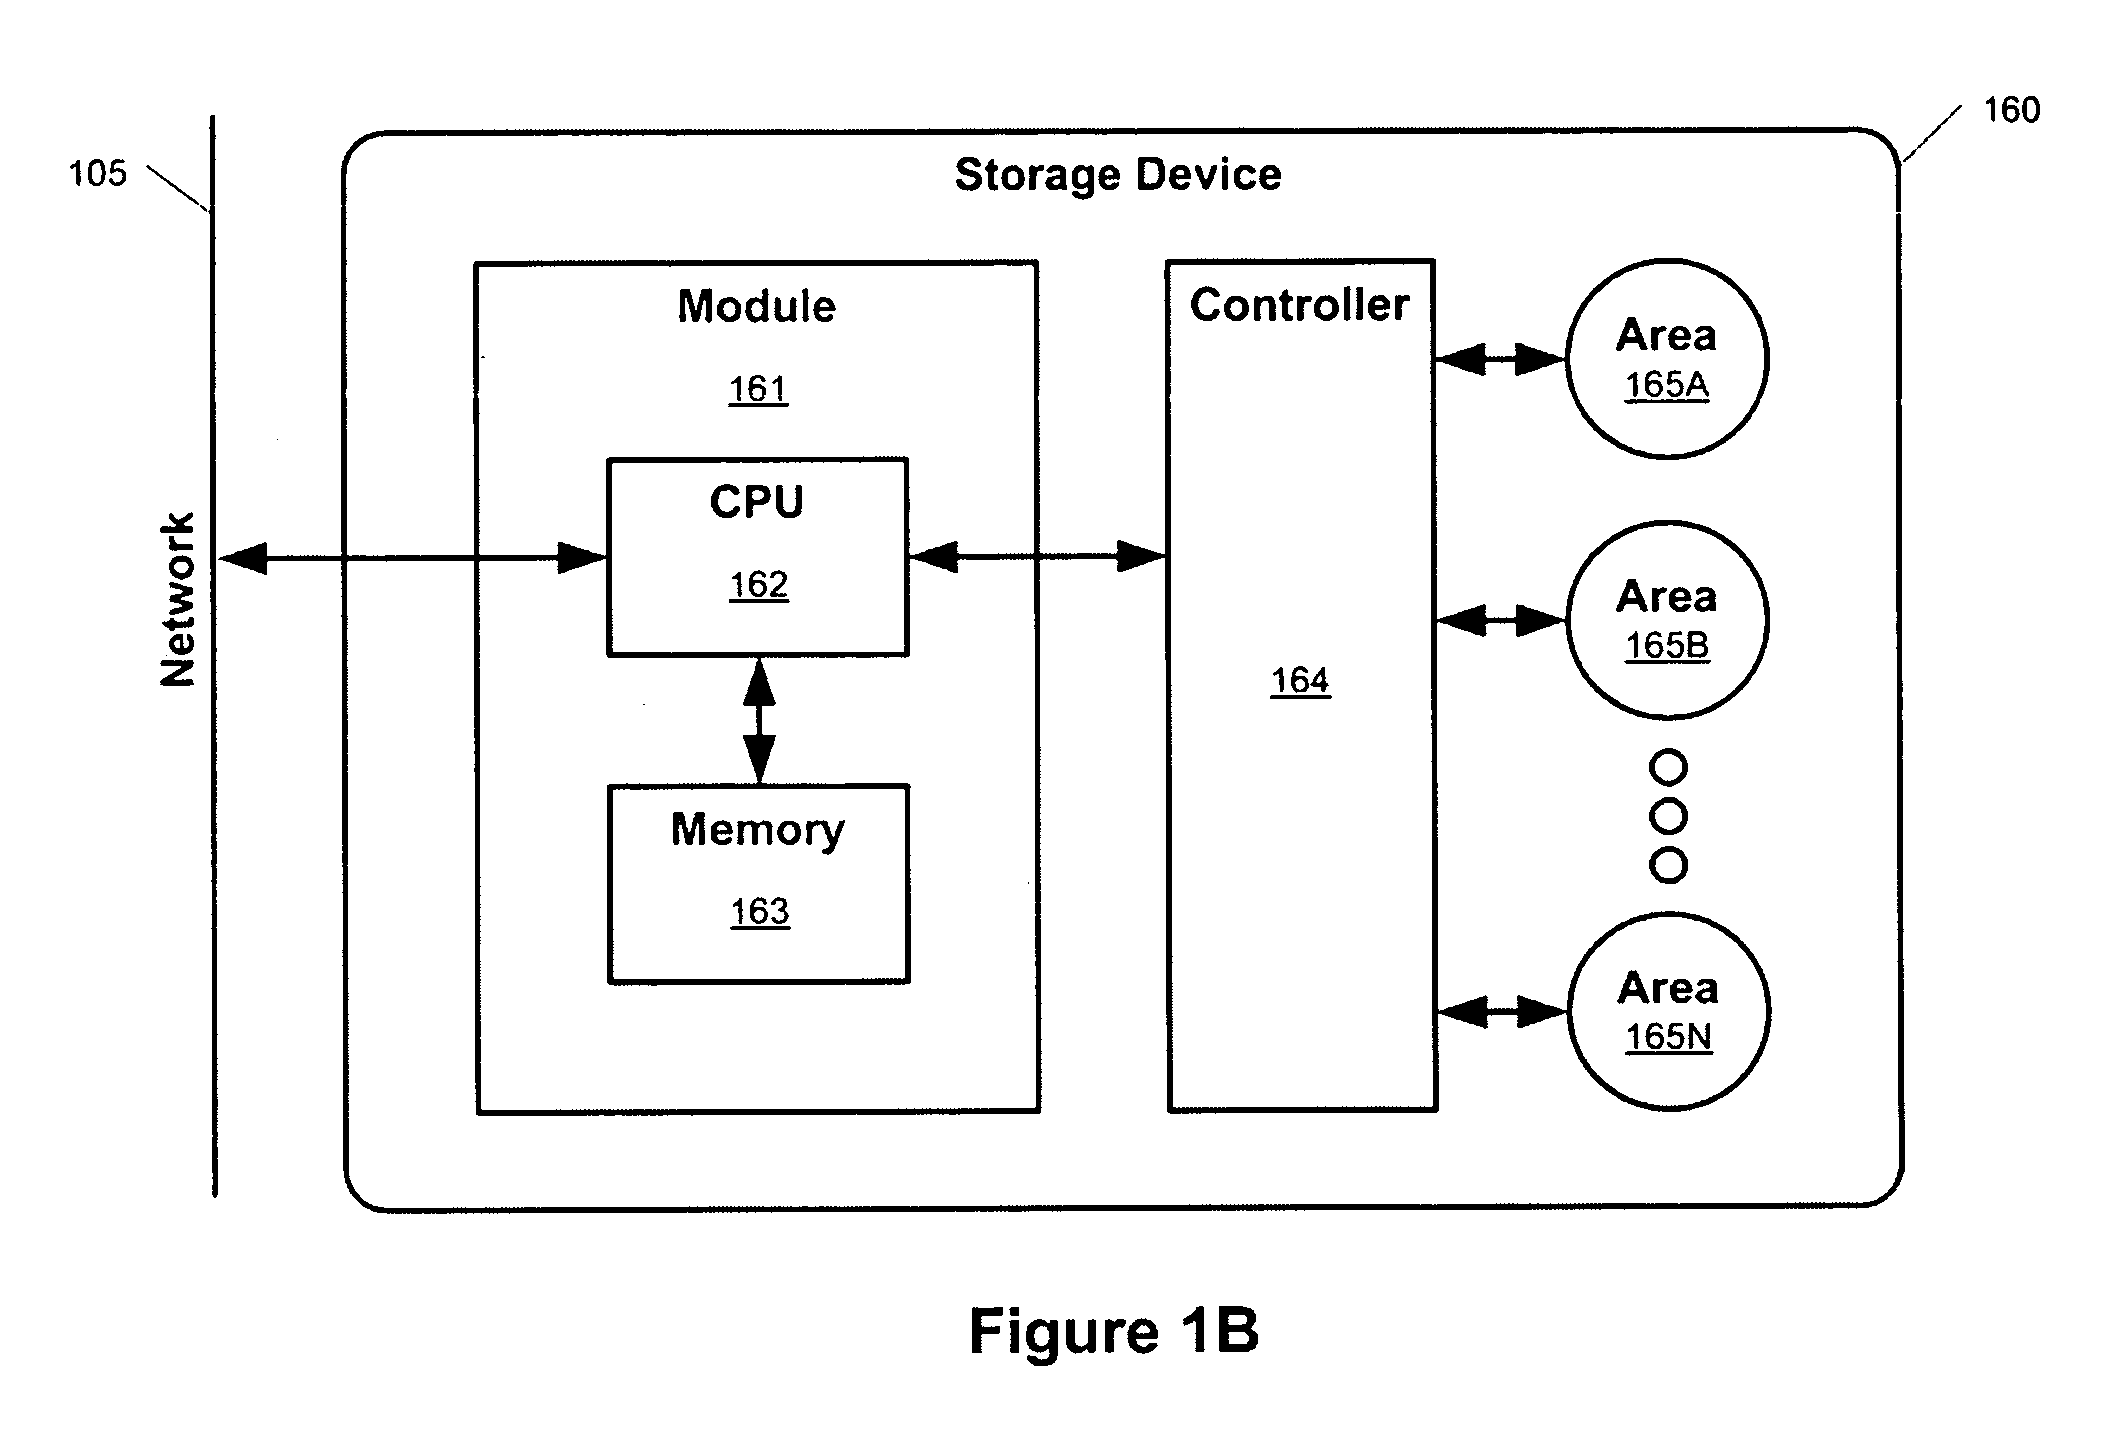 Systems and methods for deriving storage area commands